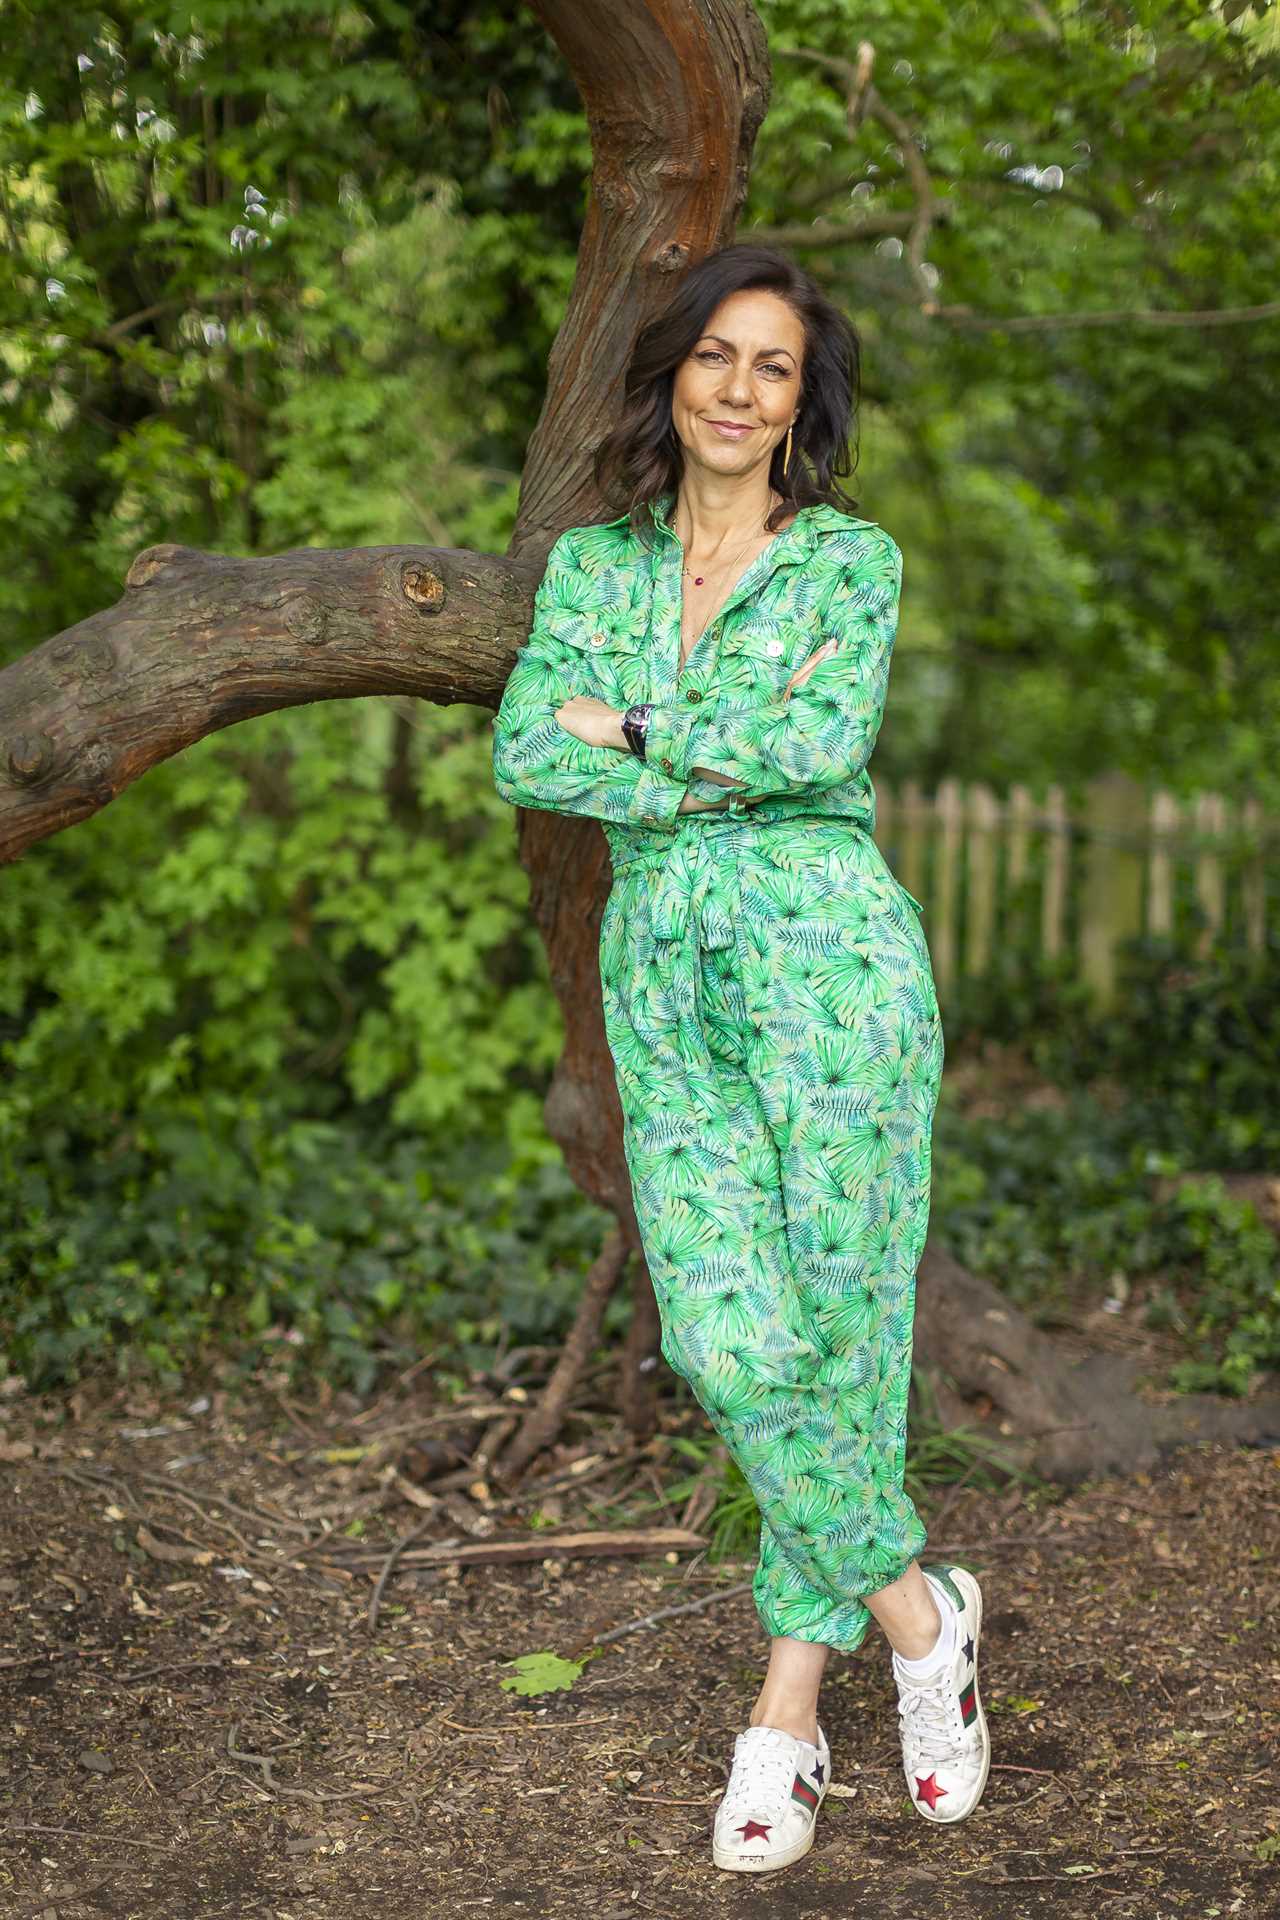 Julia Bradbury Shares Breast Cancer Update and Urges Women to Attend Screenings